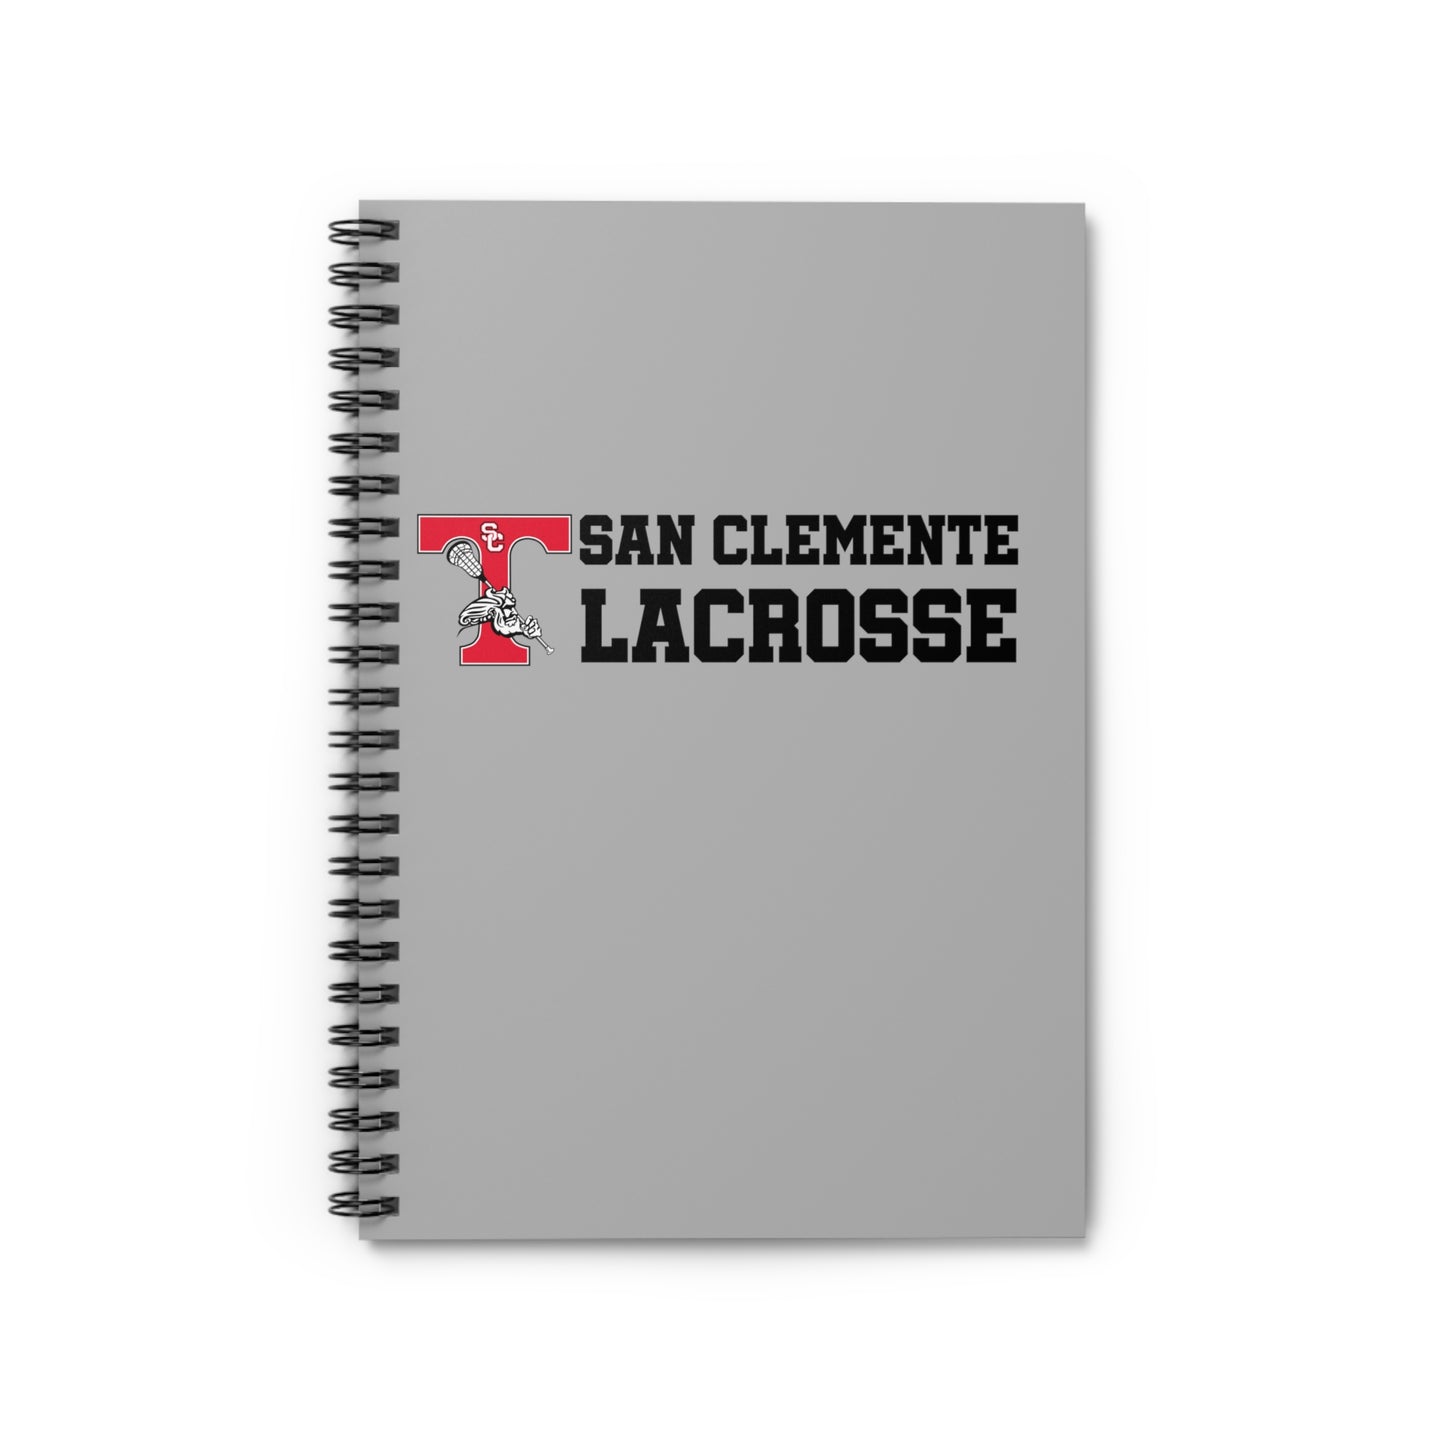 Triton Lacrosse Spiral Notebook - Ruled Line